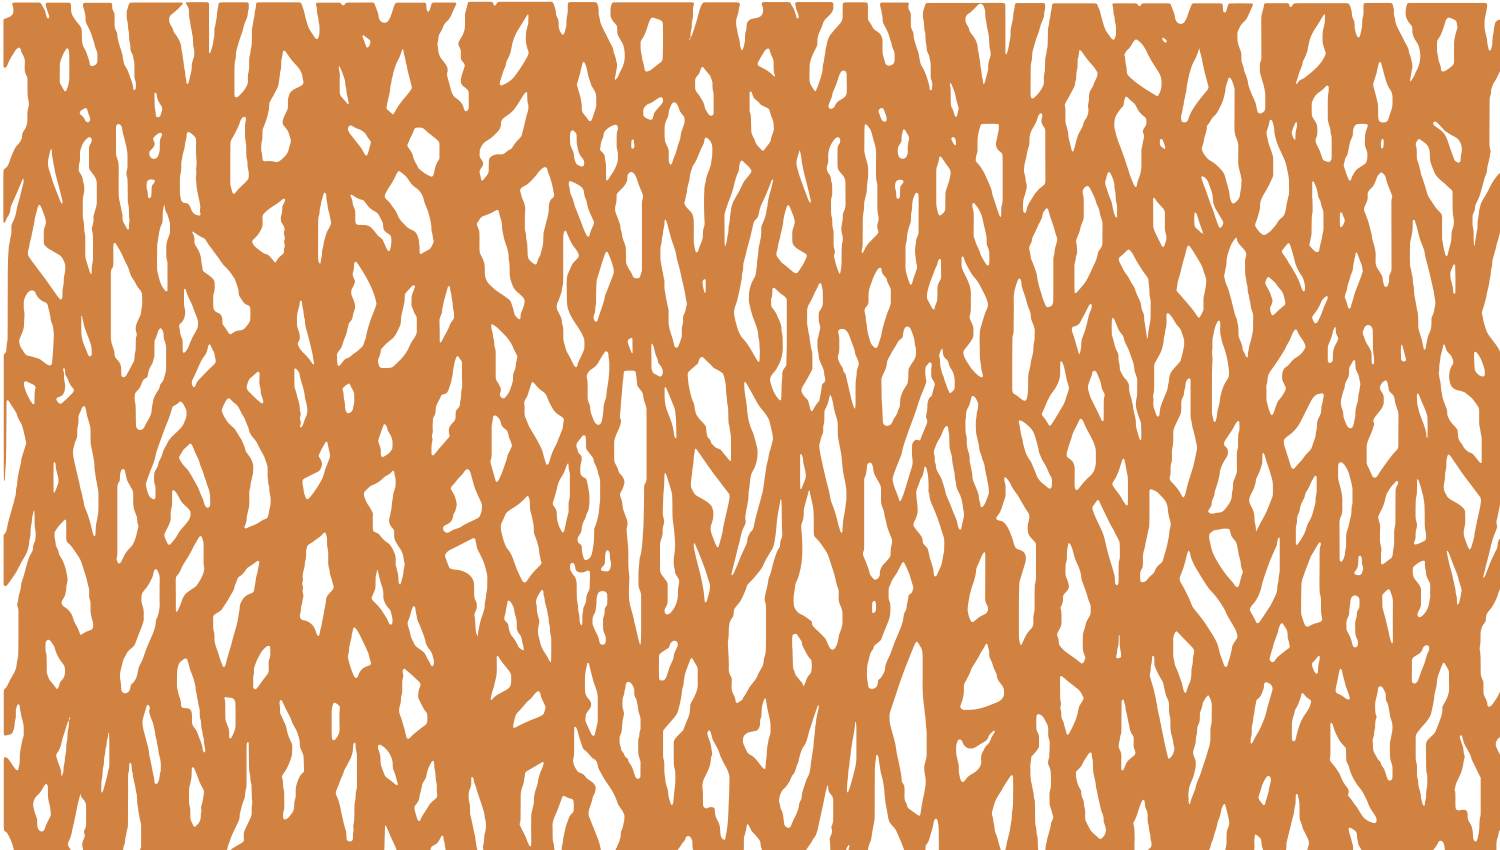 Parasoleil™ Quiet Wood© pattern displayed with a ochre color overlay